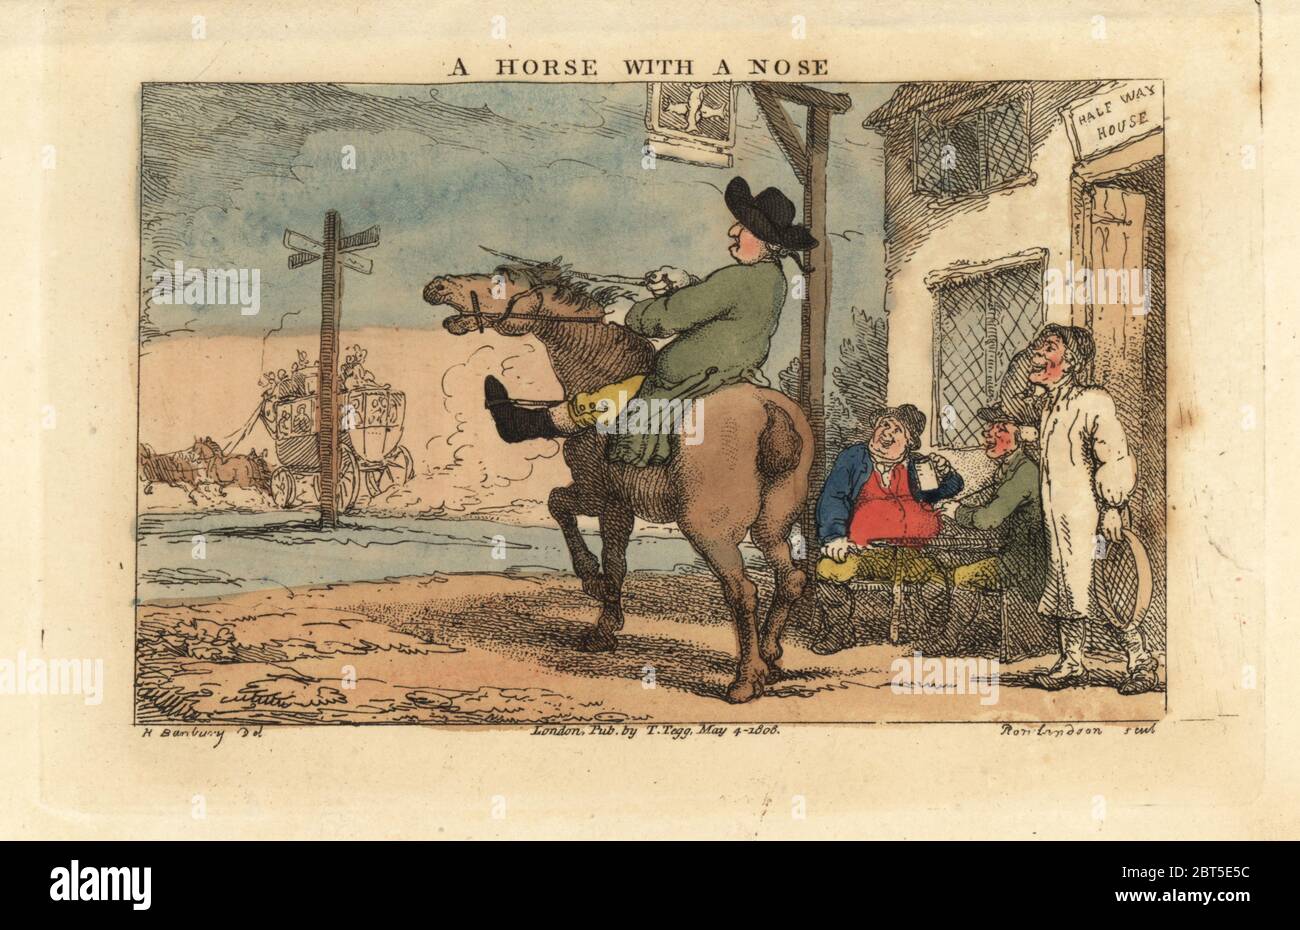 Regency man trying to stop a horse entering a tavern. Drinkers laugh at his struggles to control his horse, as a stage coach rides off in the distance. A Horse with a Nose. Handcoloured copperplate engraving by Thomas Rowlandson after an illustration by Henry Bunbury from Geoffrey Gambados An Academy for Grown Horsemen and Annals of Horsemanship, London, 1809. Stock Photo